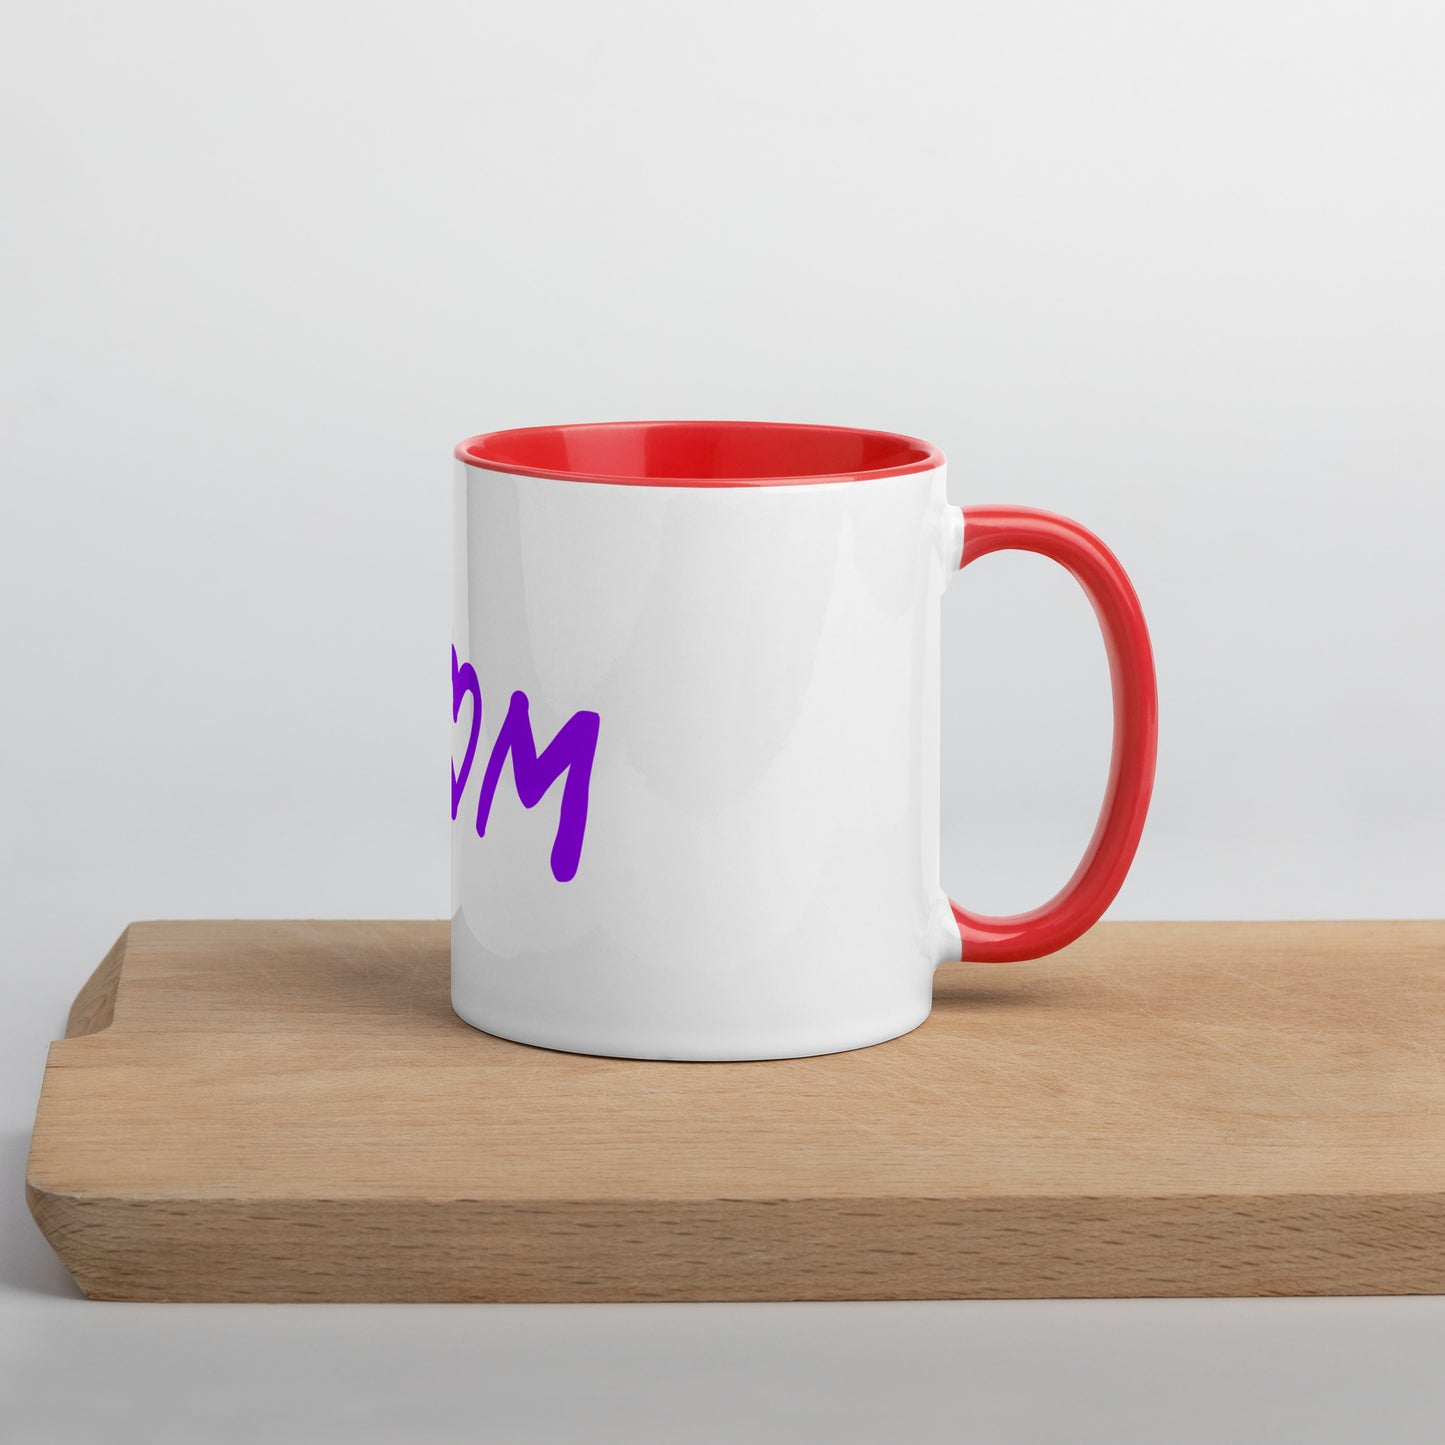 “M❤️M” Coffee Mug - Weave Got Gifts - Unique Gifts You Won’t Find Anywhere Else!